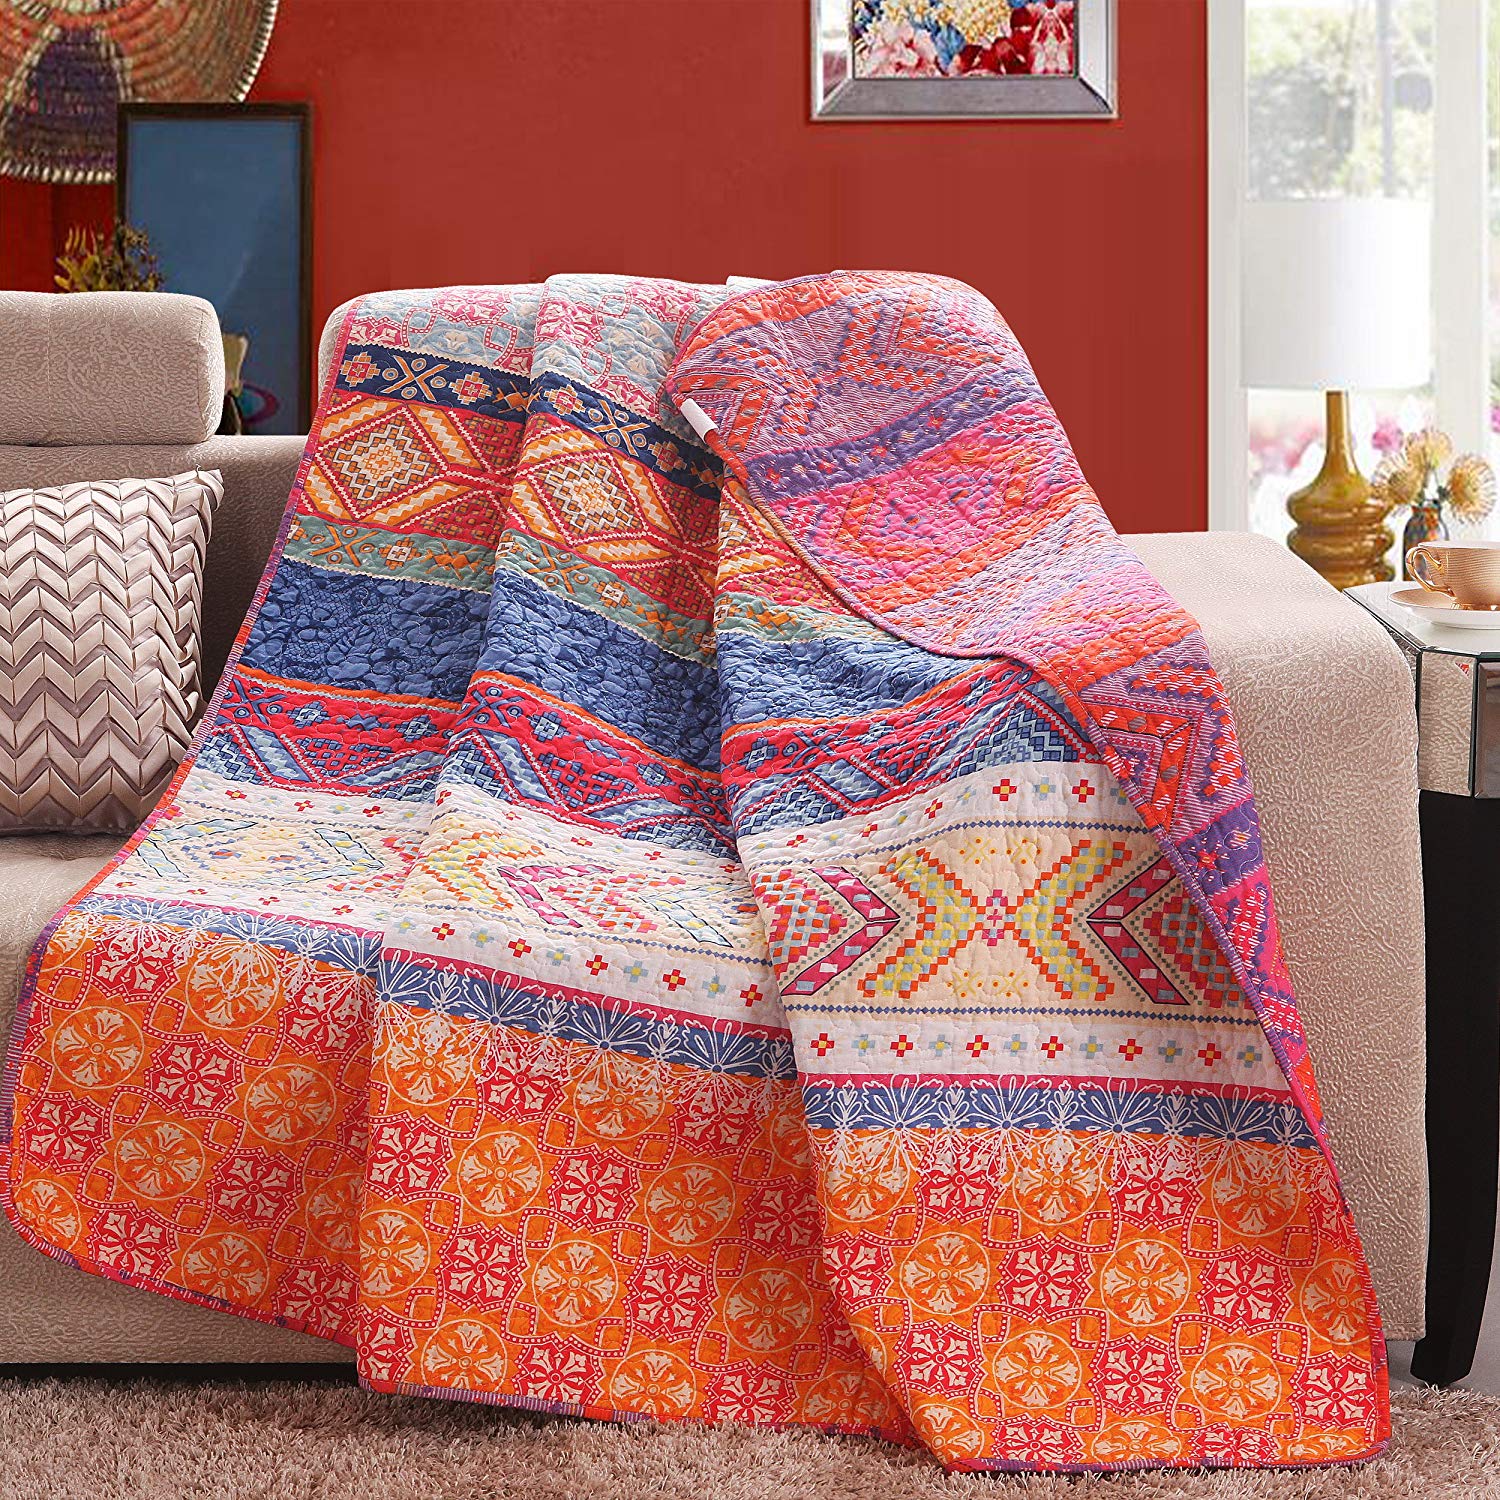 quilted throws